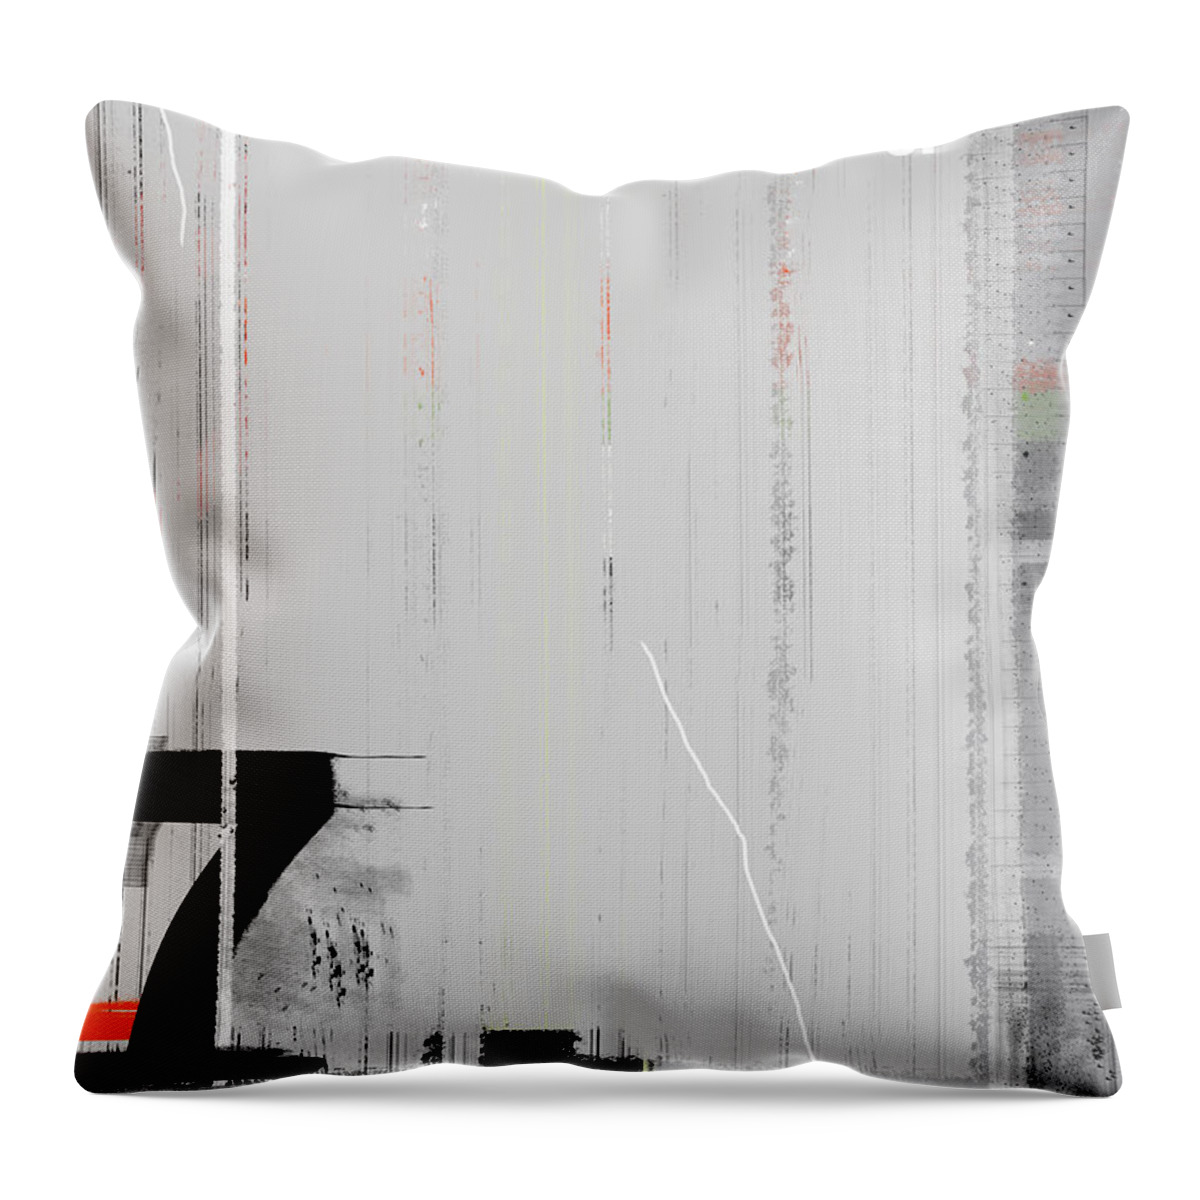 Abstract Throw Pillow featuring the digital art Seven by Naxart Studio